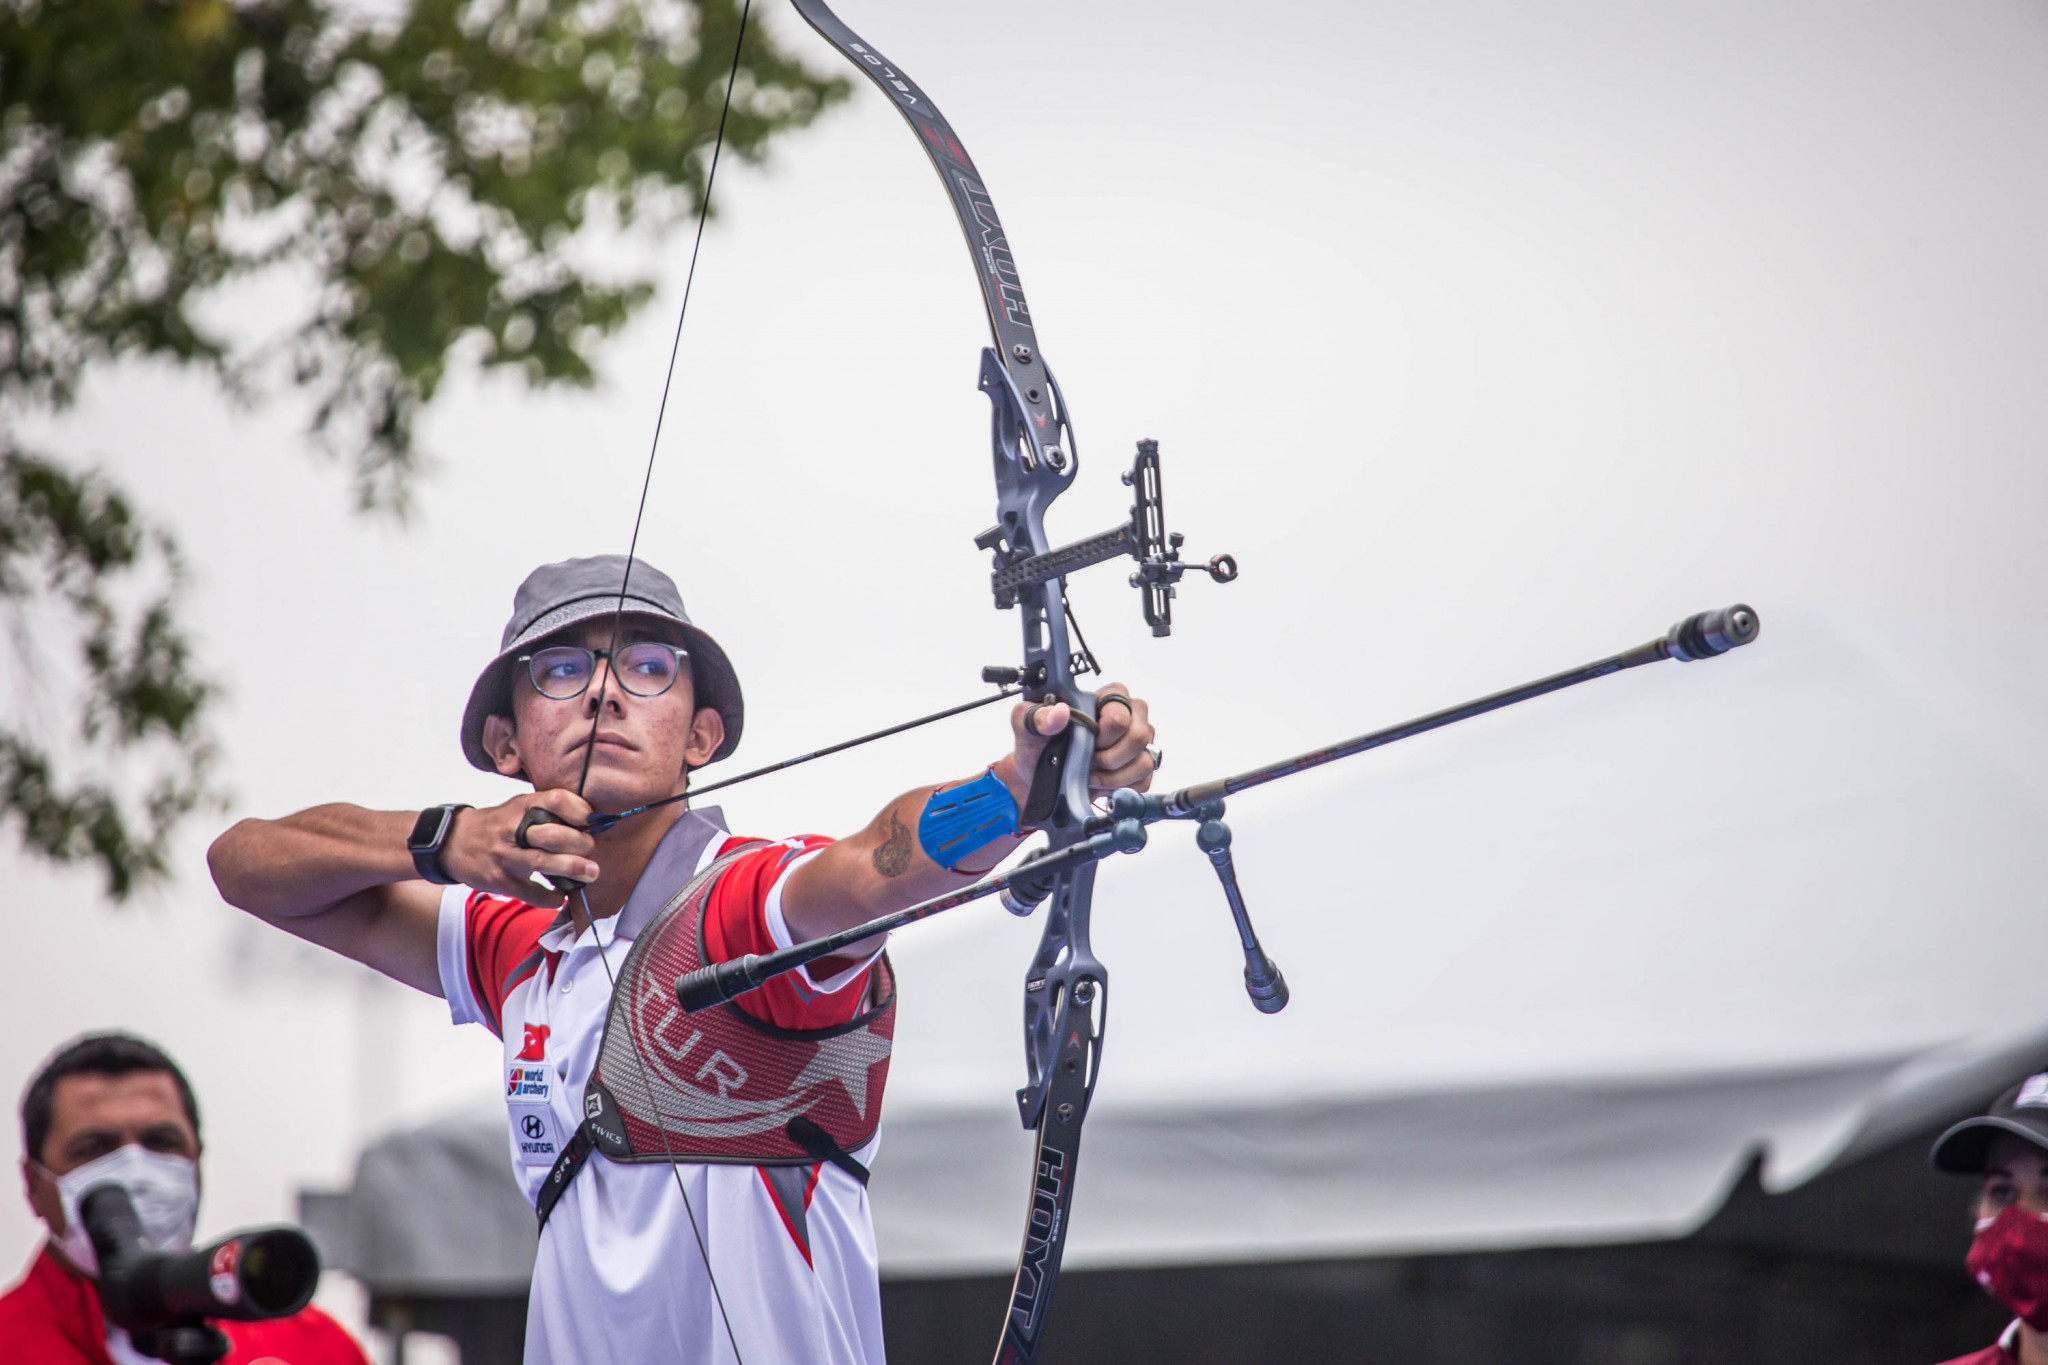 Barebow set to debut at European Archery Indoor Championships in Laško 